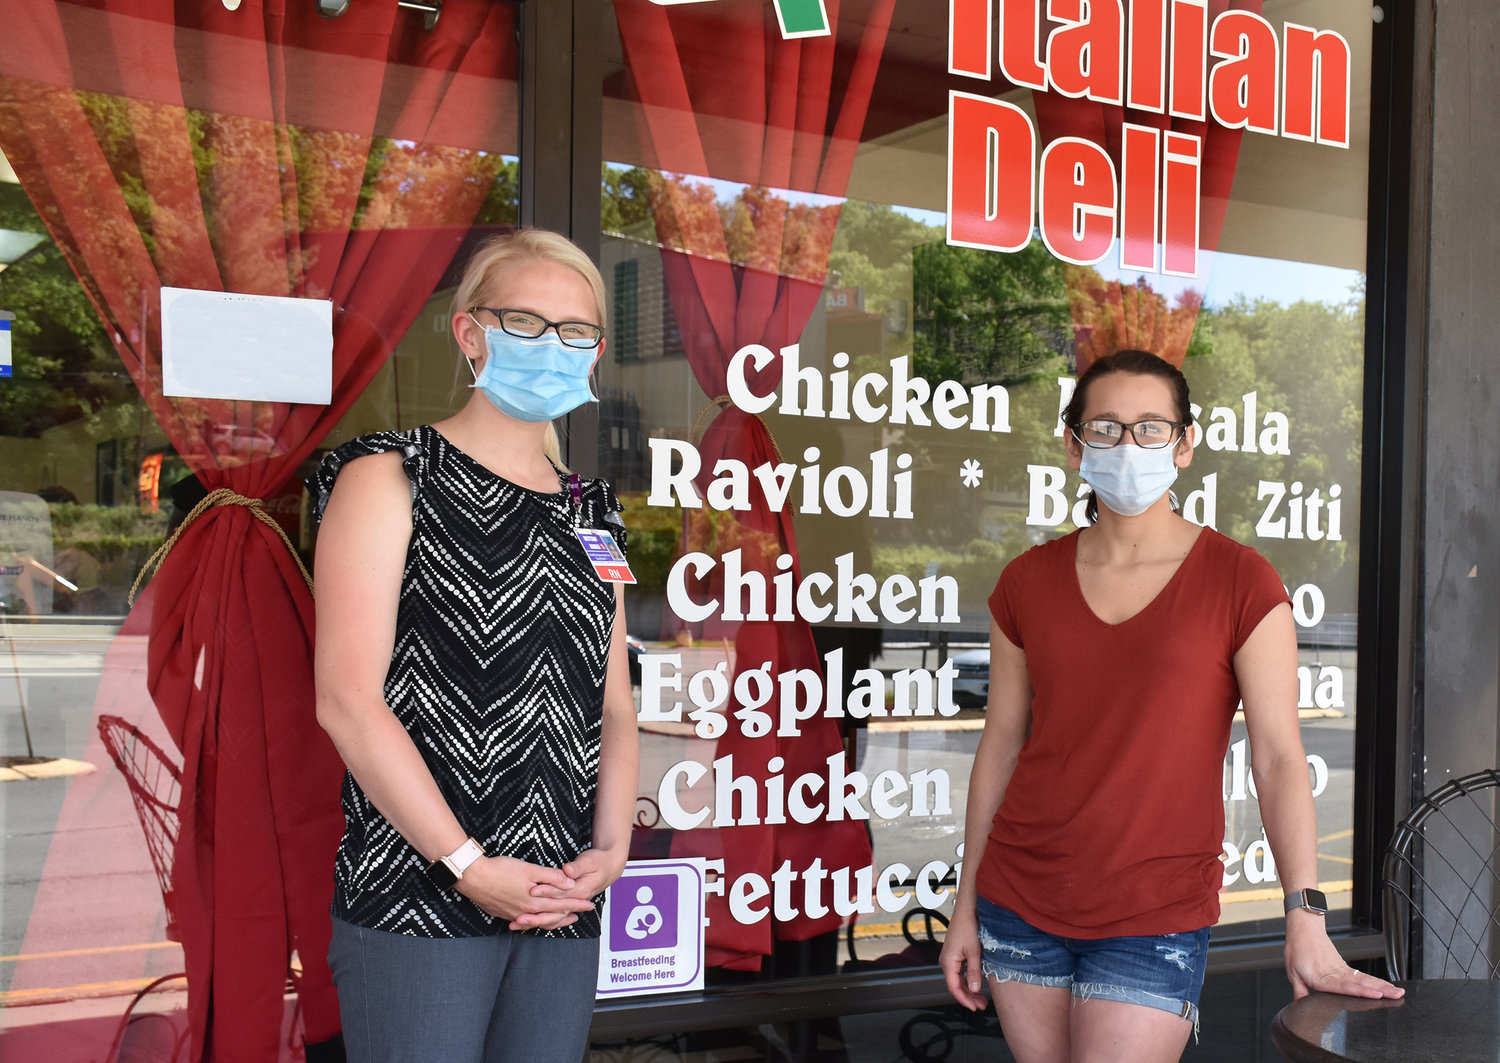 Brittany Kimble, RN, BSN, IBCLC, of the Women’s Health Center, left, is shown with Kori Pons who co-owns Arthur Avenue Italian Deli in Honesdale with her husband Peter. Arthur Avenue is one of nearly 20 businesses supporting breastfeeding families in the community.